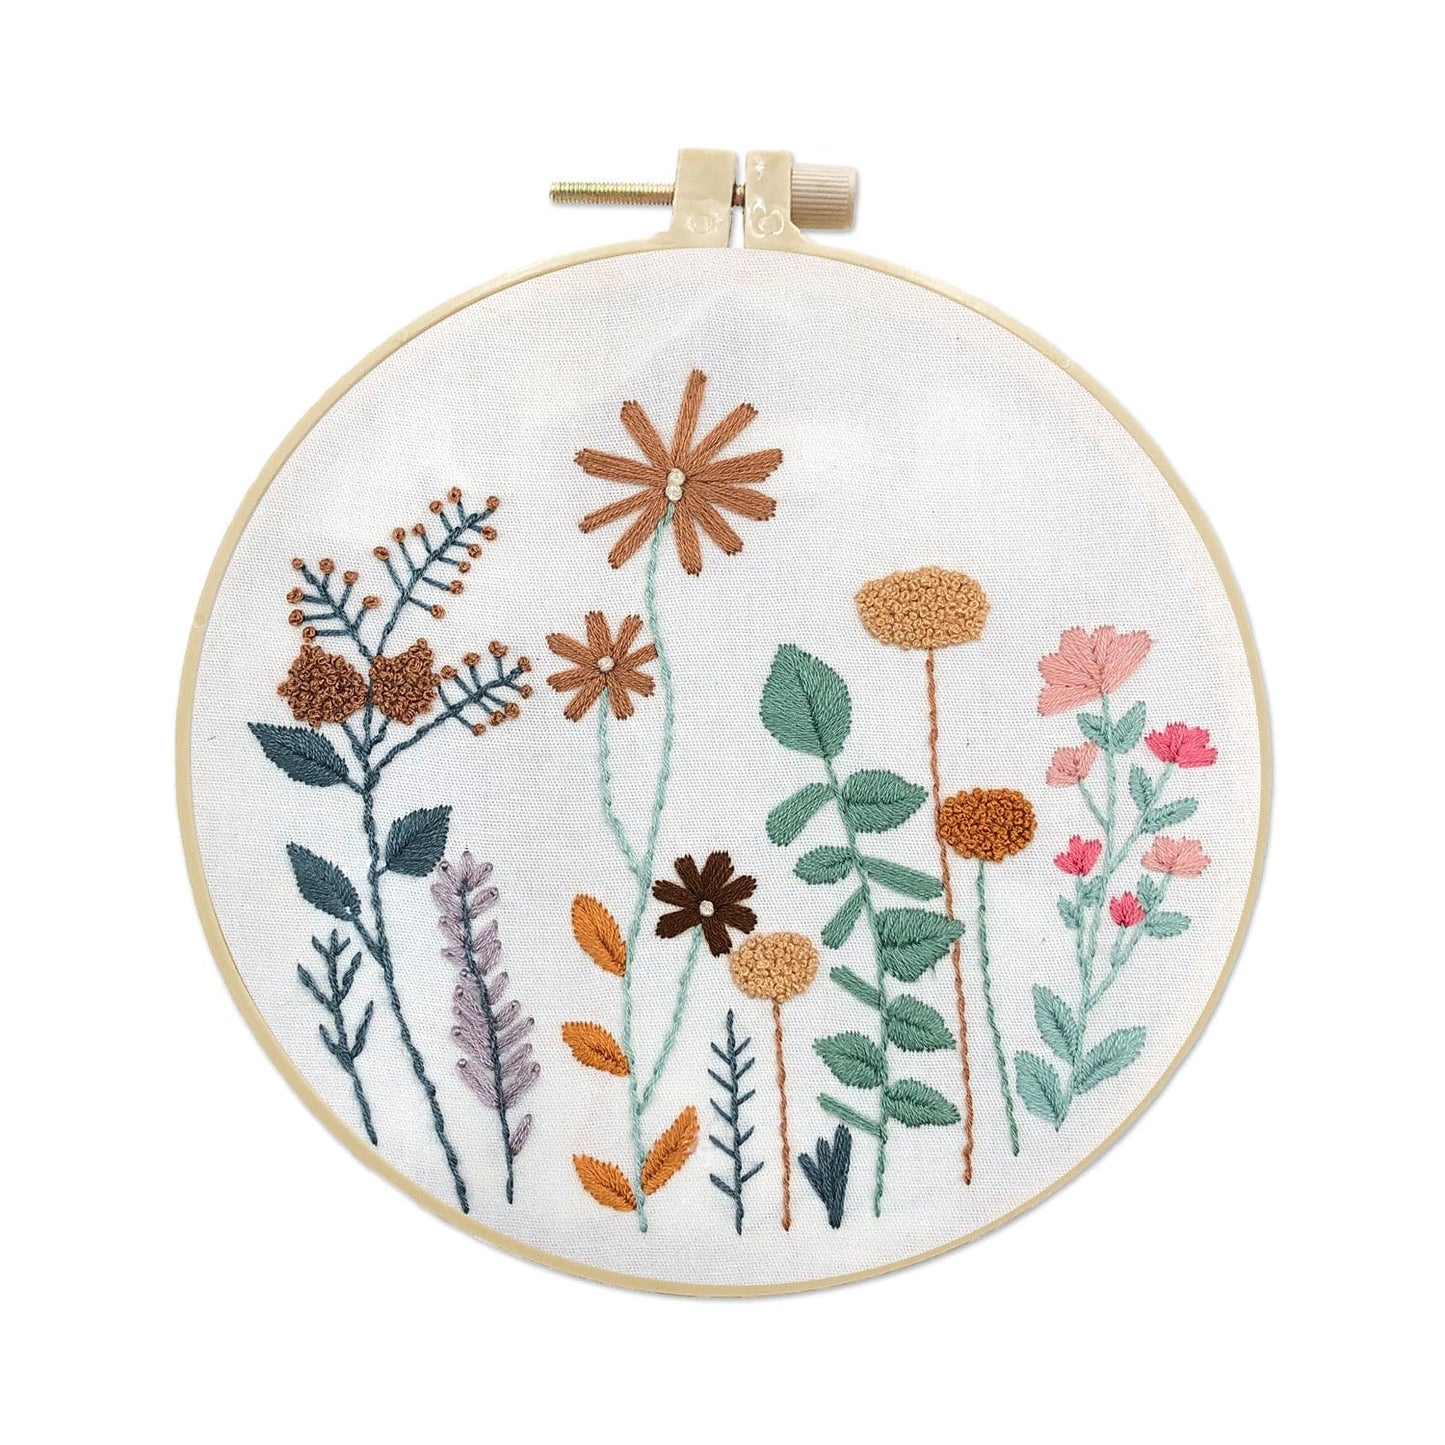 Embroidery Diy Embroidery Material Package Beginner Manual Self-embroidery